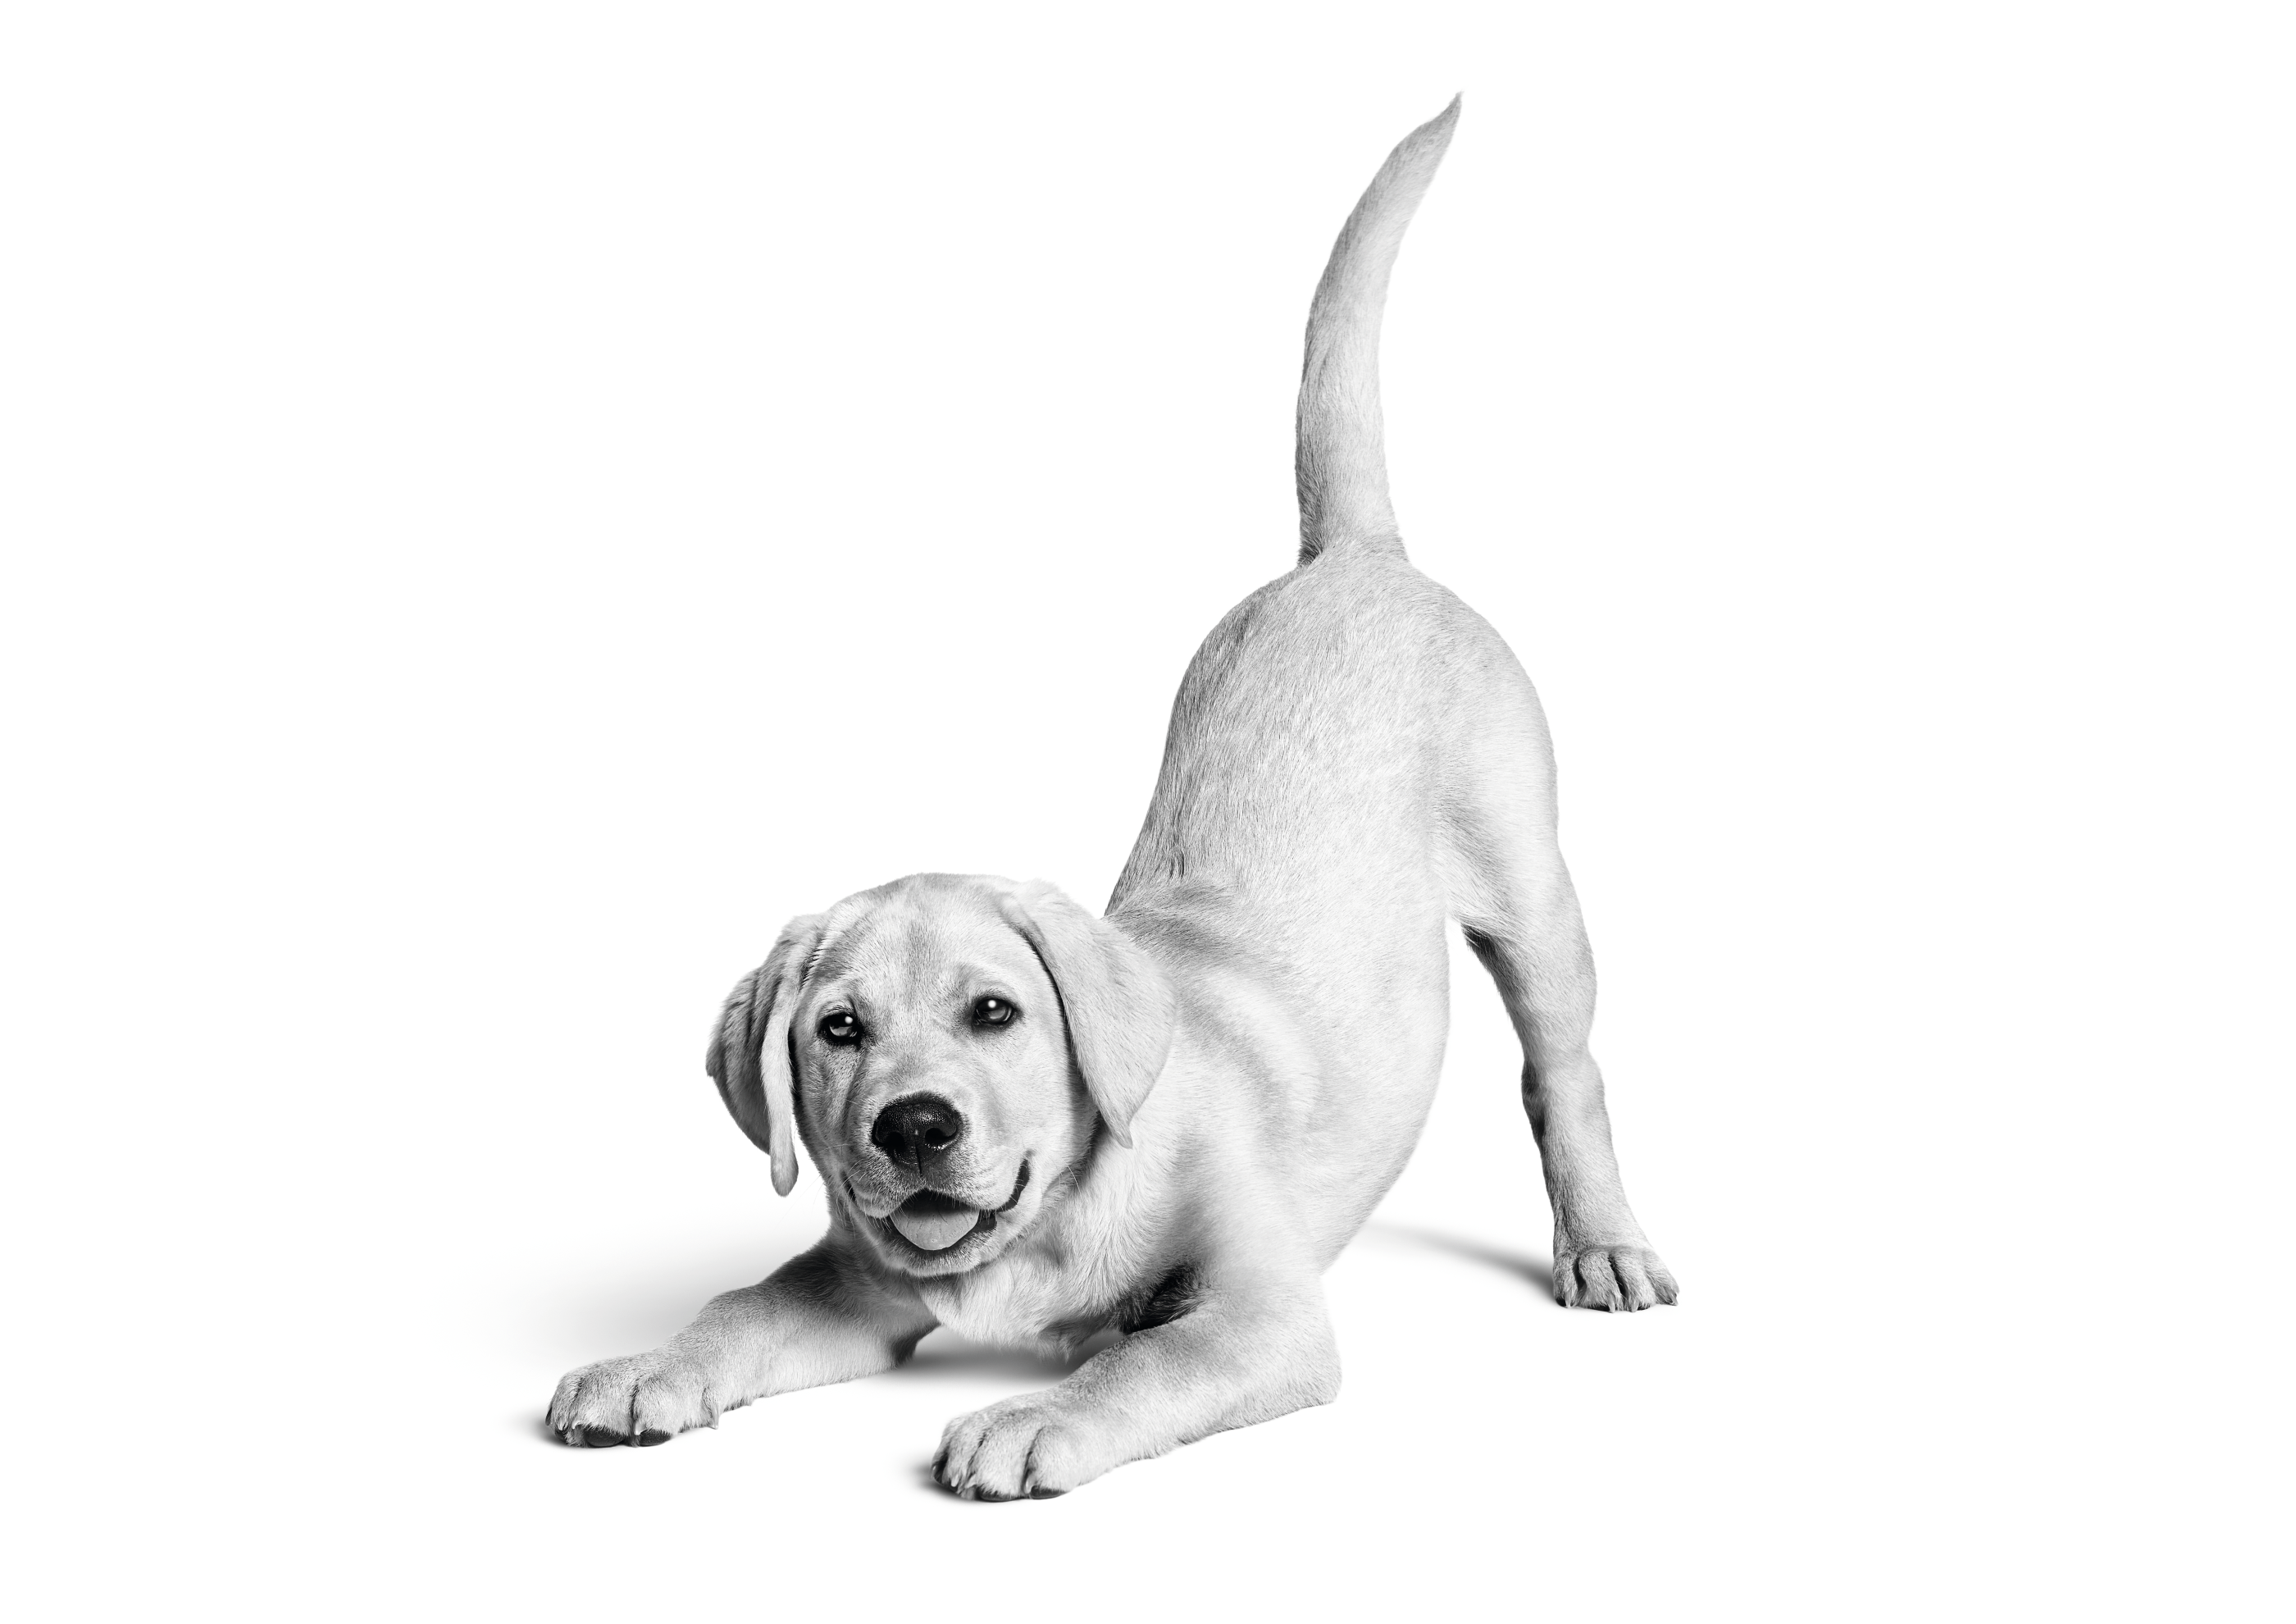 Image of Labrador puppy playing